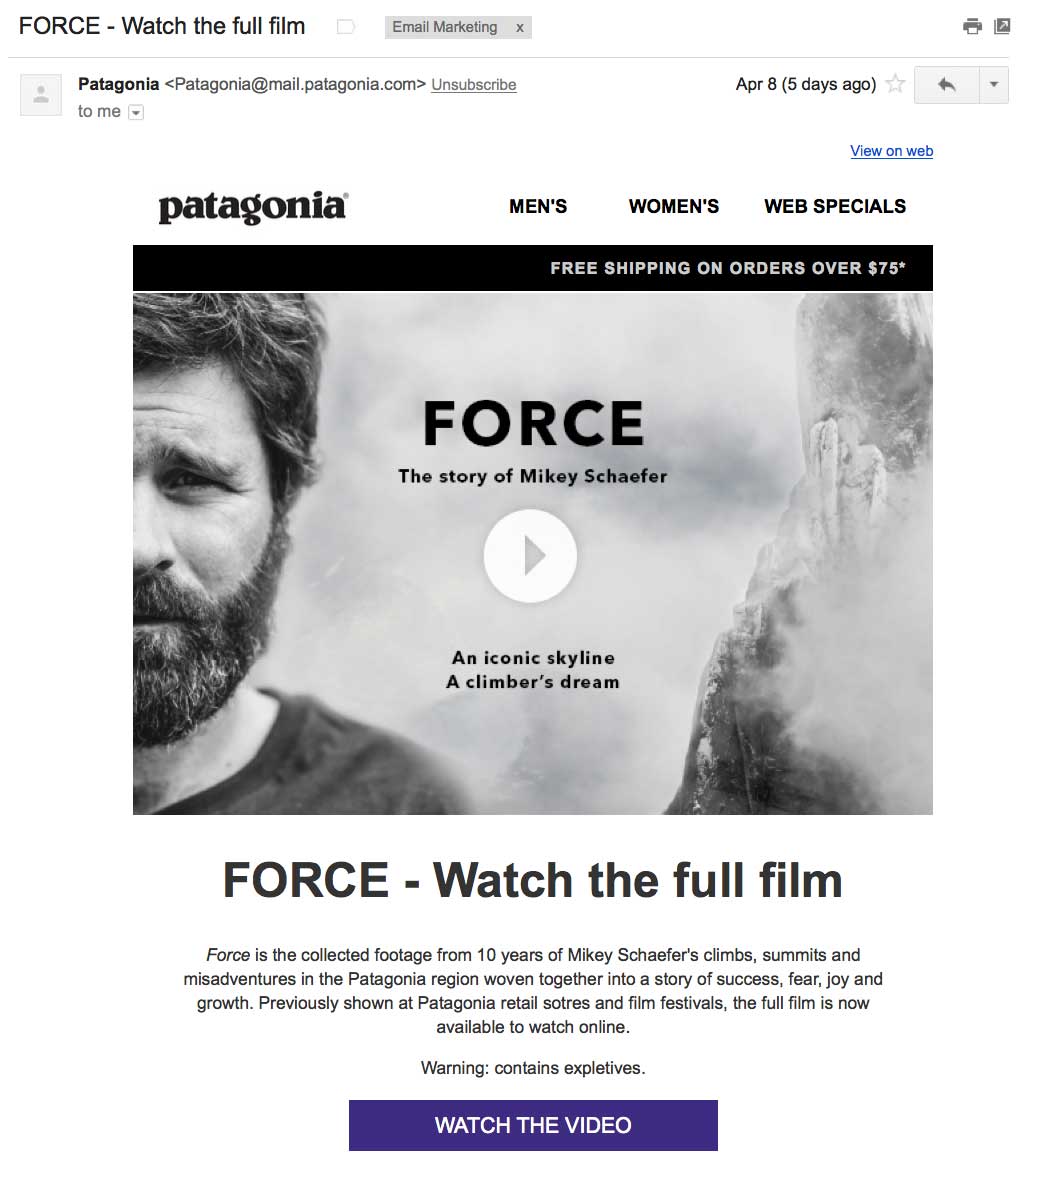 patagonia force video email